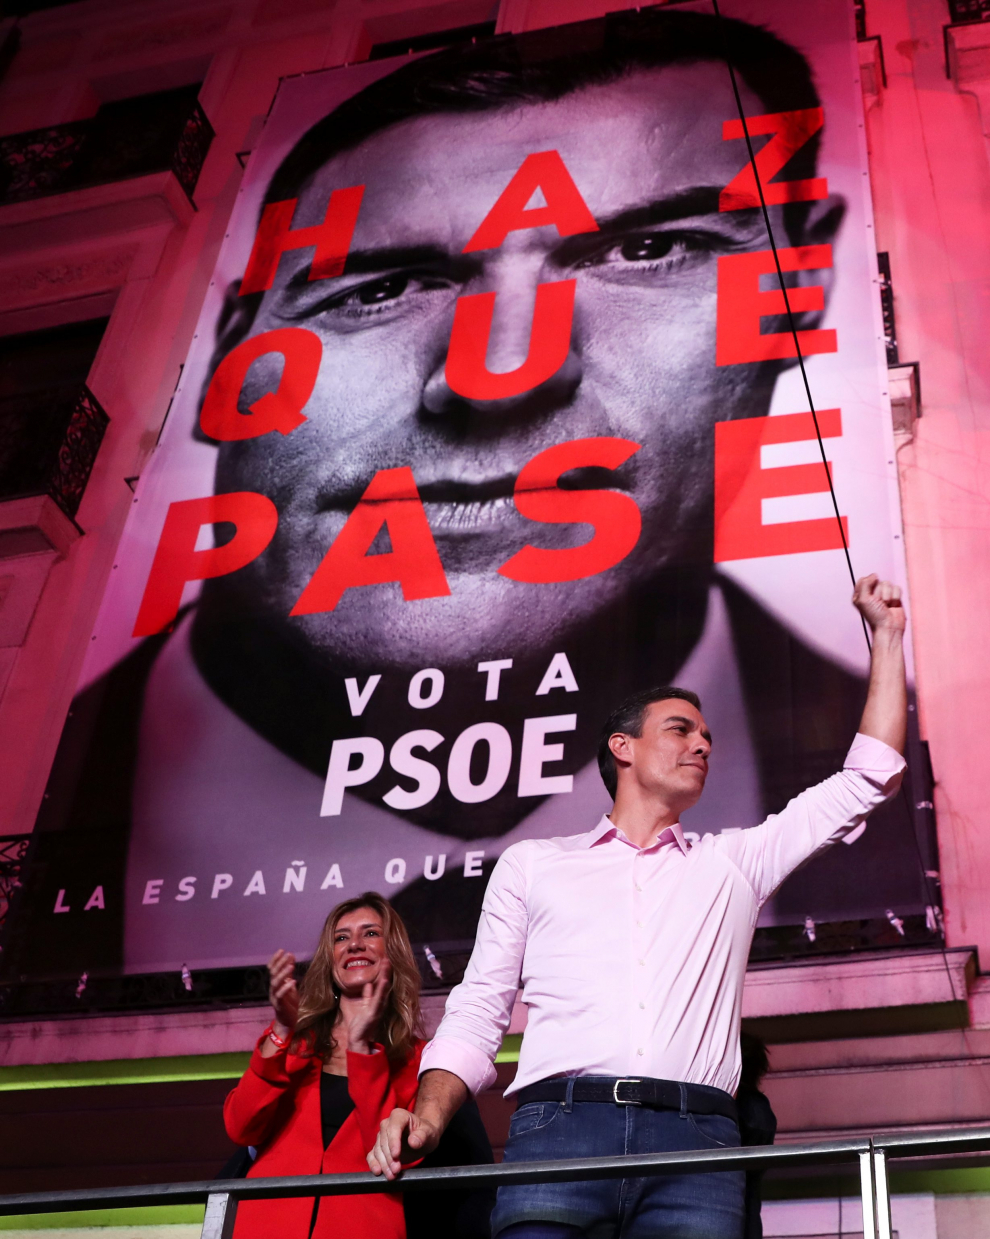 Spain's Prime Minister Pedro Sanchez of the Socialist Workers' Party (PSOE) kisses his wife Begona Gomez while celebrating the result in Spain's general election in Madrid, Spain, April 29, 2019. REUTERS/Sergio Perez     TPX IMAGES OF THE DAY [[[REUTERS VOCENTO]]] SPAIN-ELECTION/SANCHEZ REAX